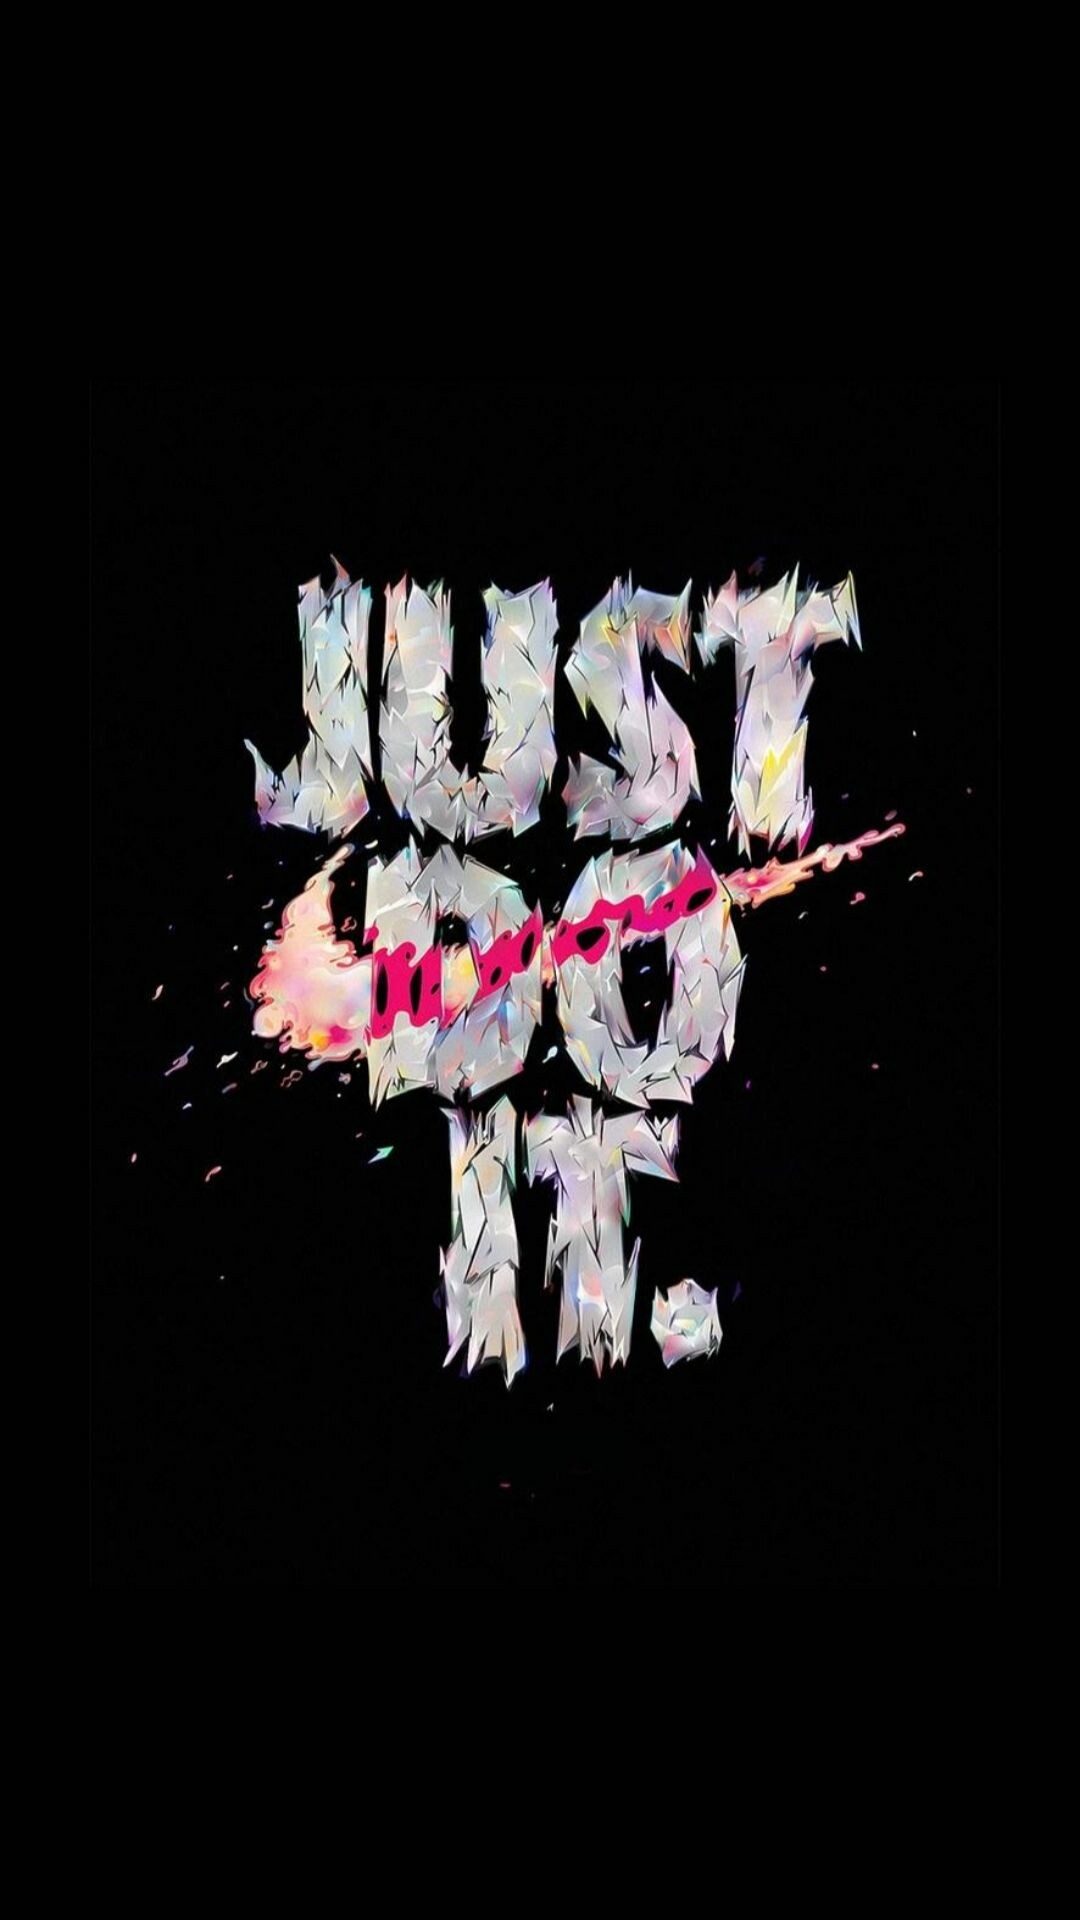 Nike: Just Do It, The eponymous slogan, Sports brand. 1080x1920 Full HD Background.